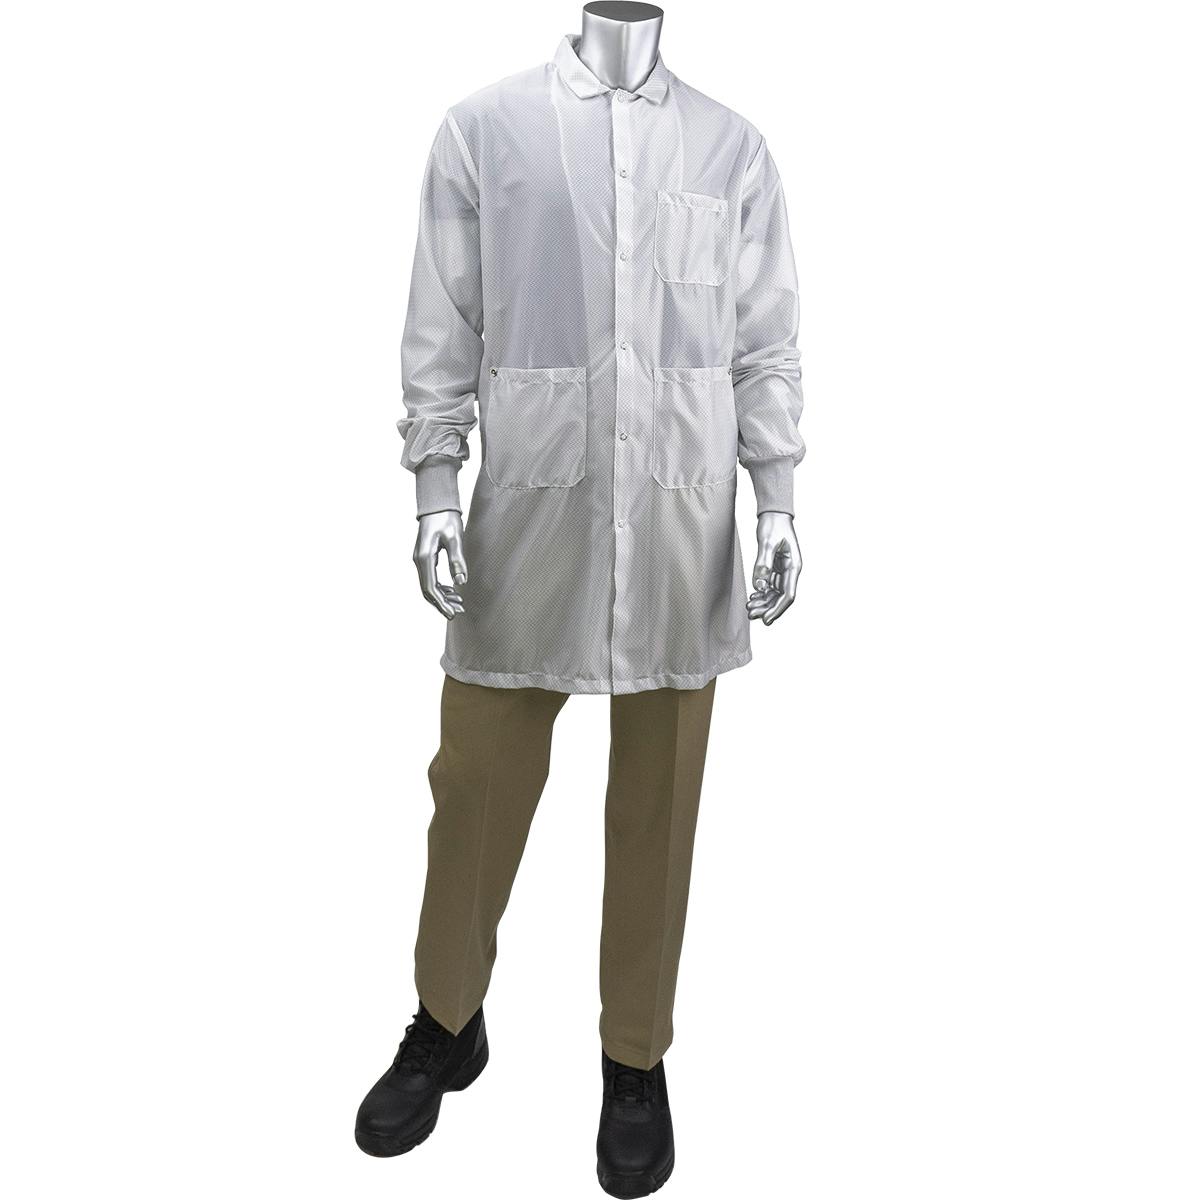 StatStar Long ESD Labcoat - ESD Knit Cuff, White (BR51C-44WH)_0